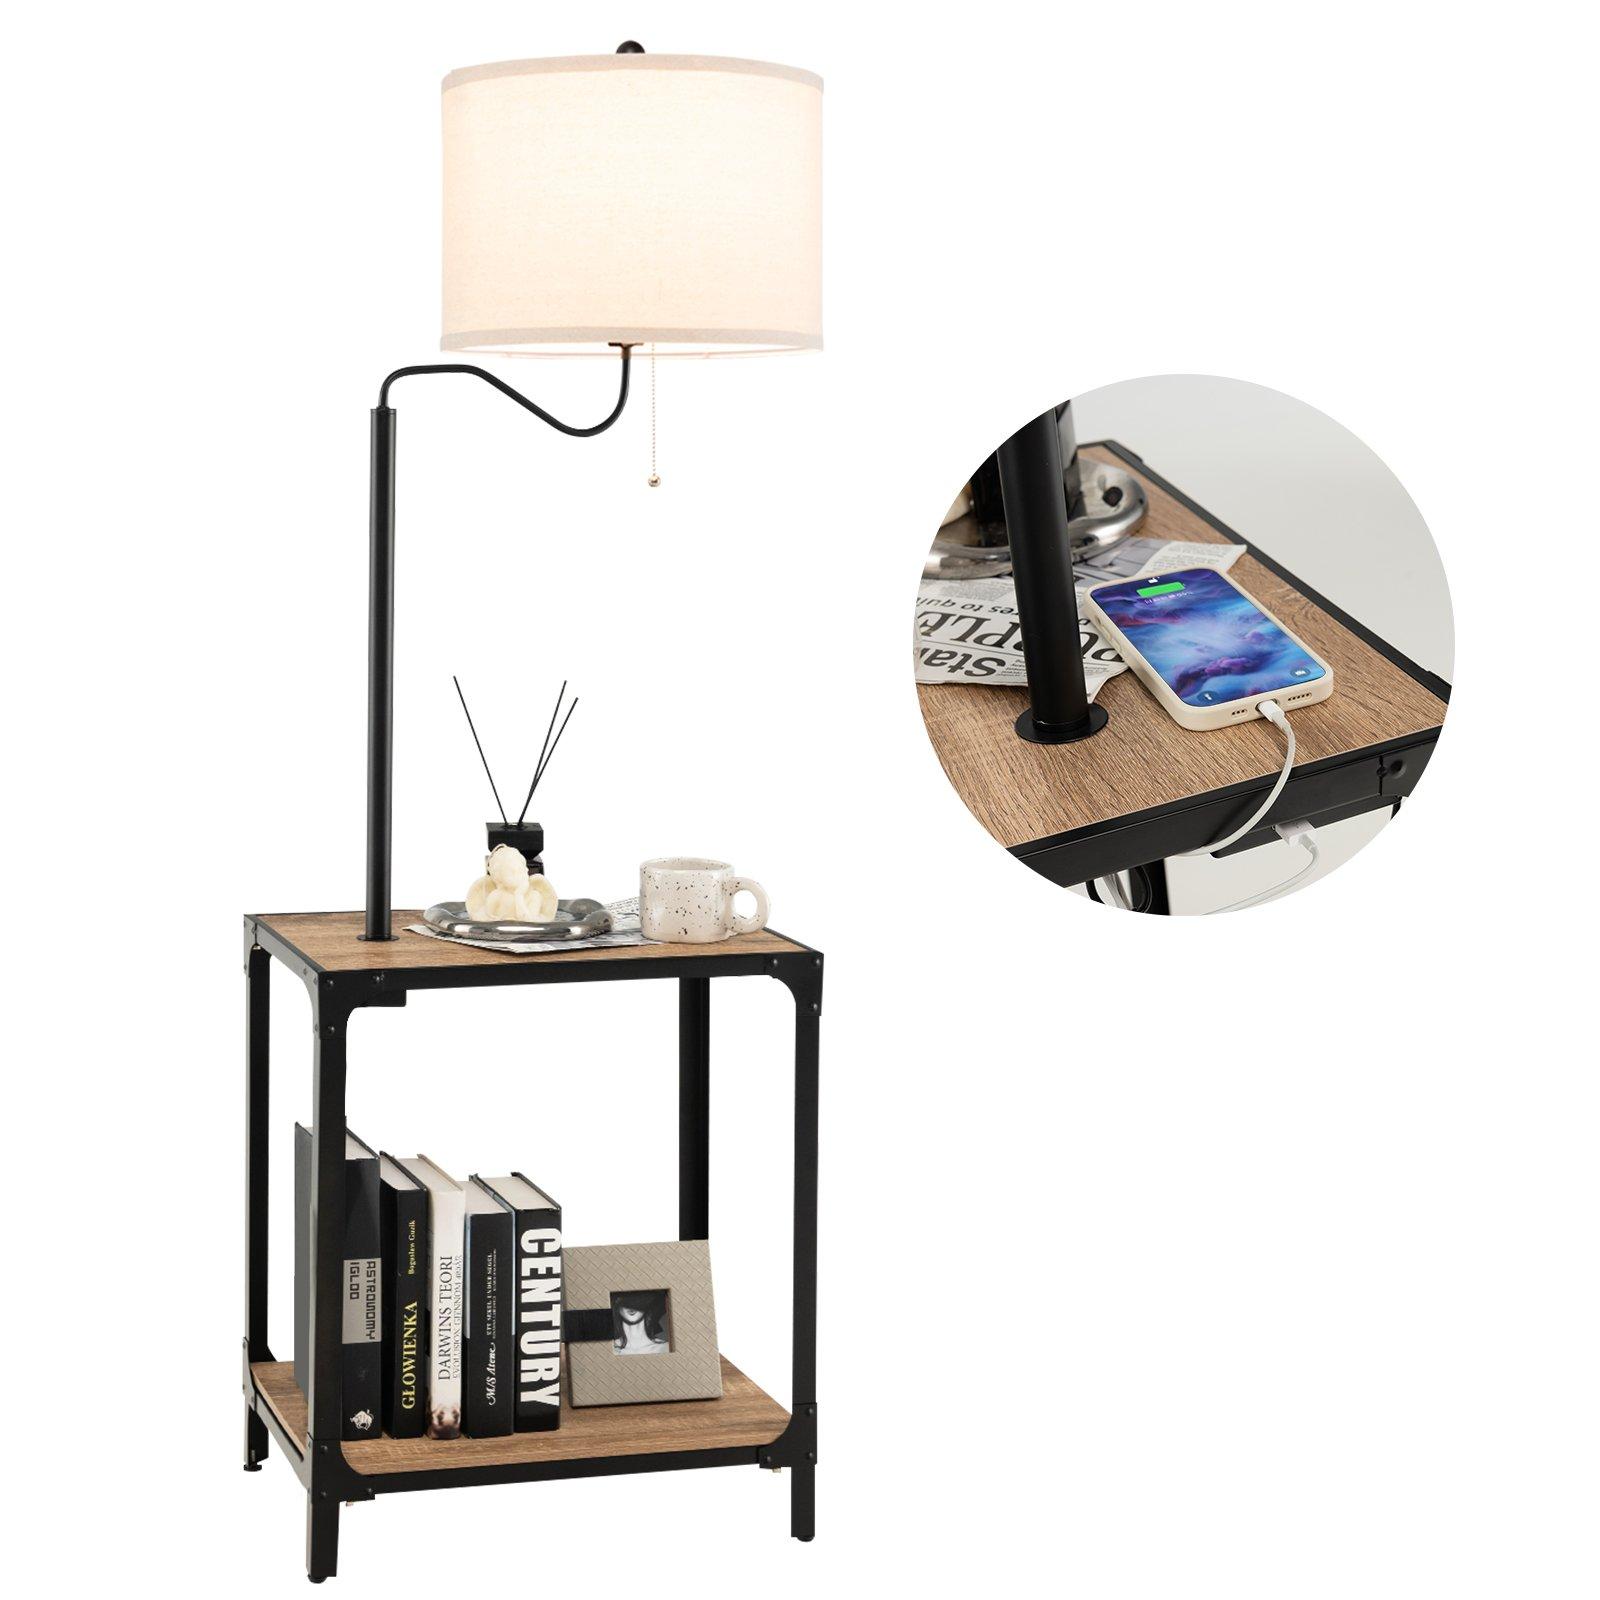 Bedside End Table with Lamp Floor Lamp W/ USB Charging Ports